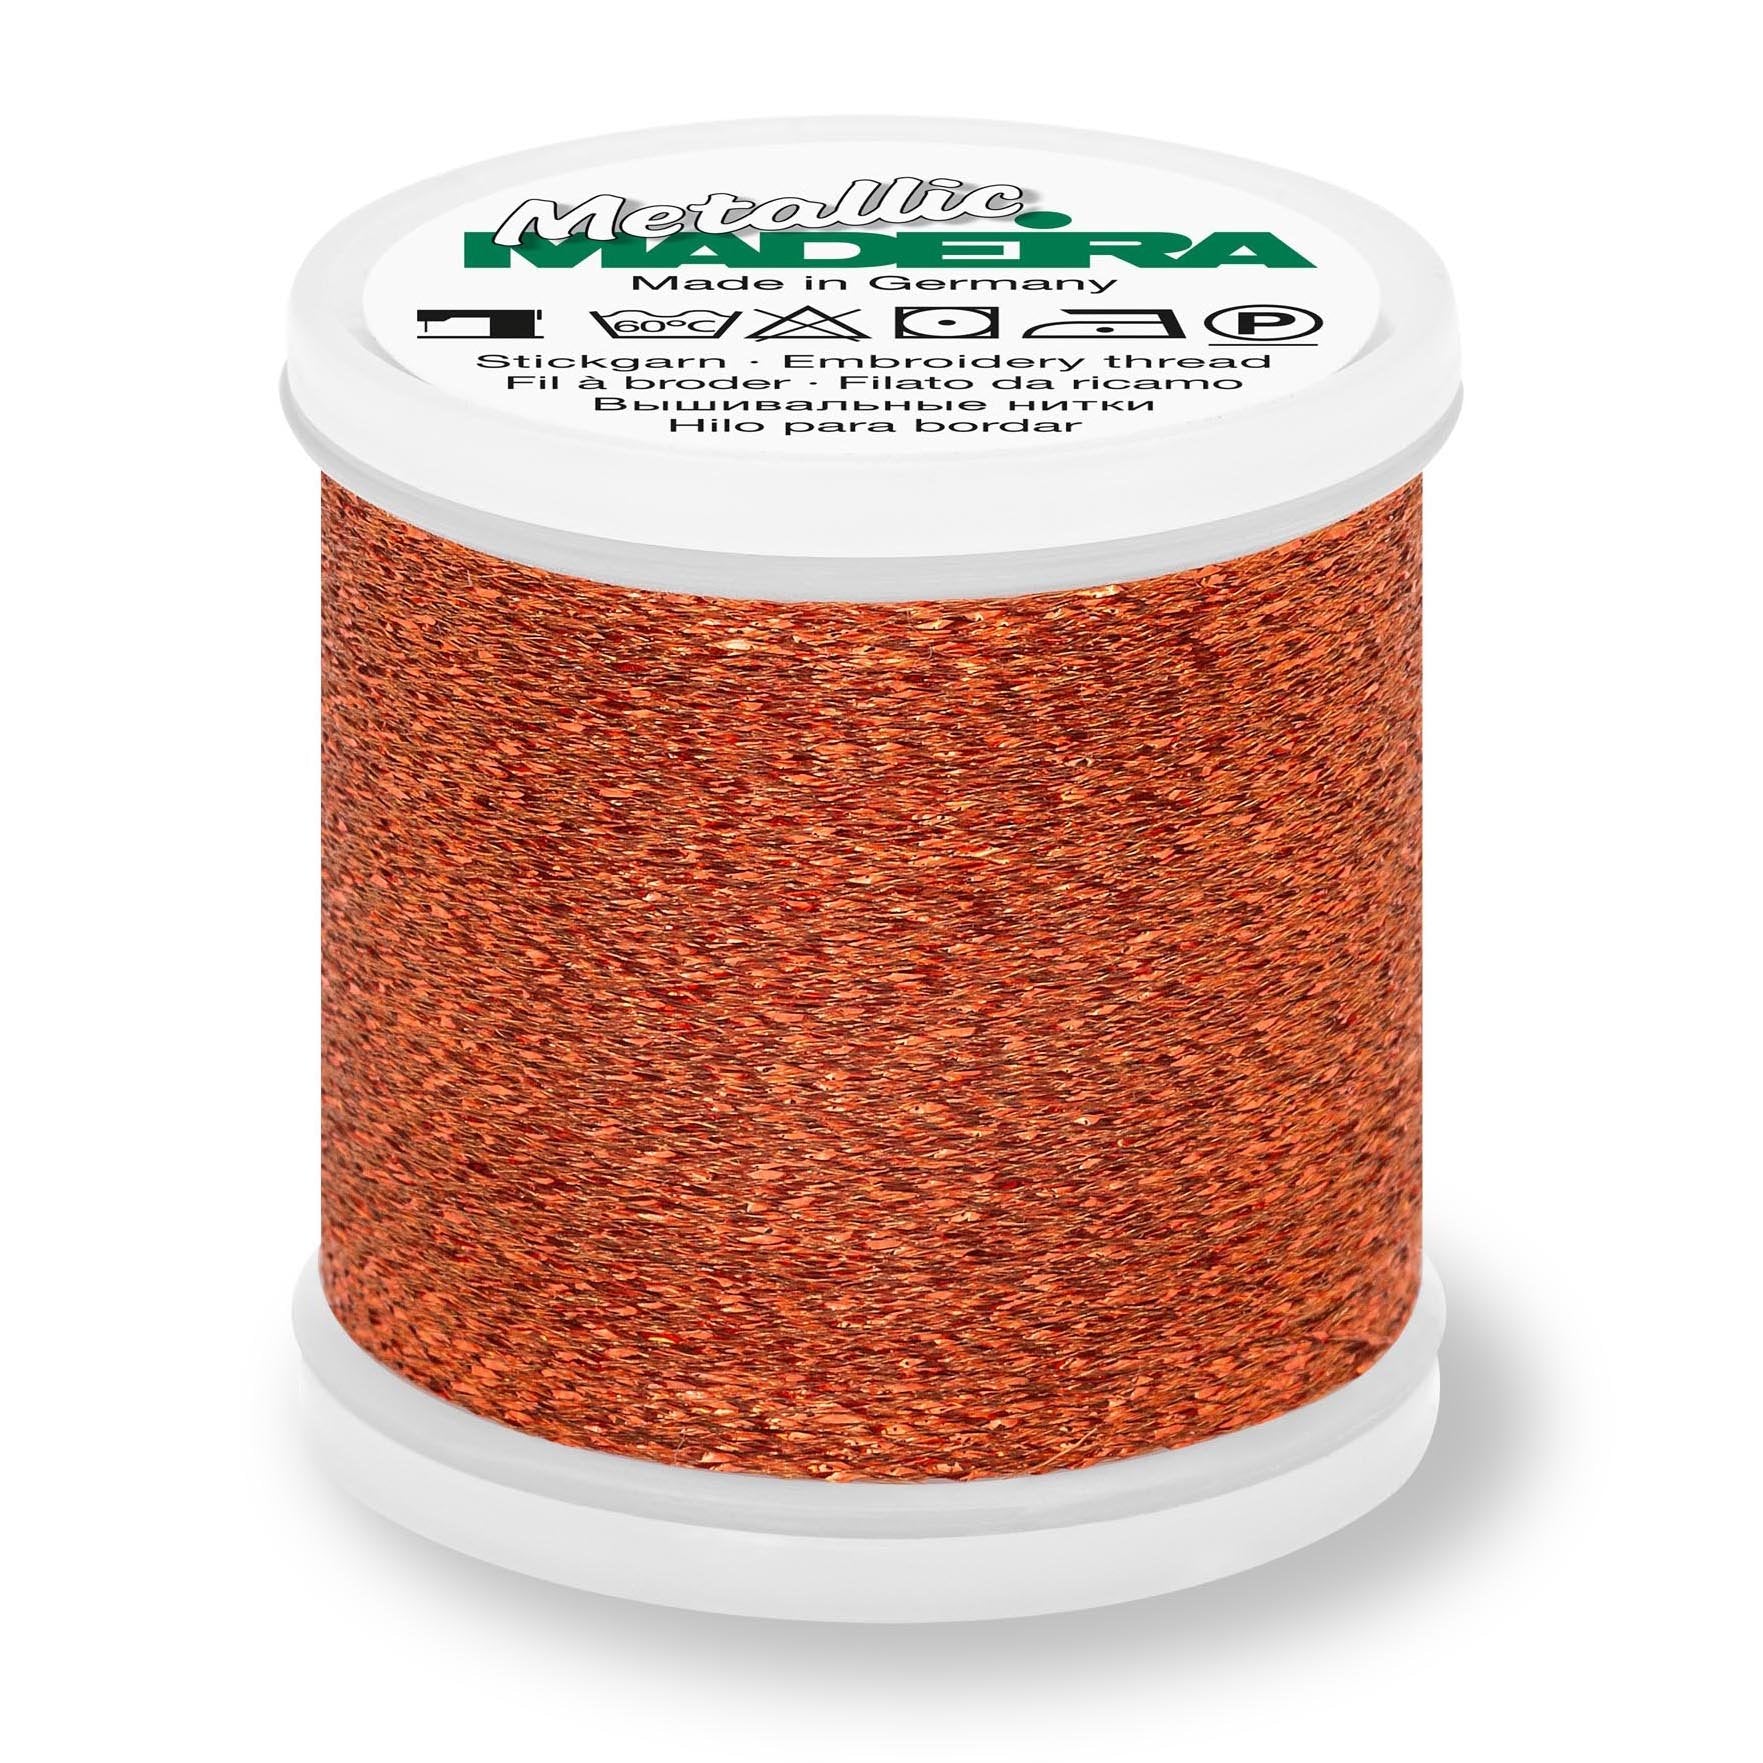 Madeira Textured Metallic Embroidery Thread, 200m Copper from Jaycotts Sewing Supplies